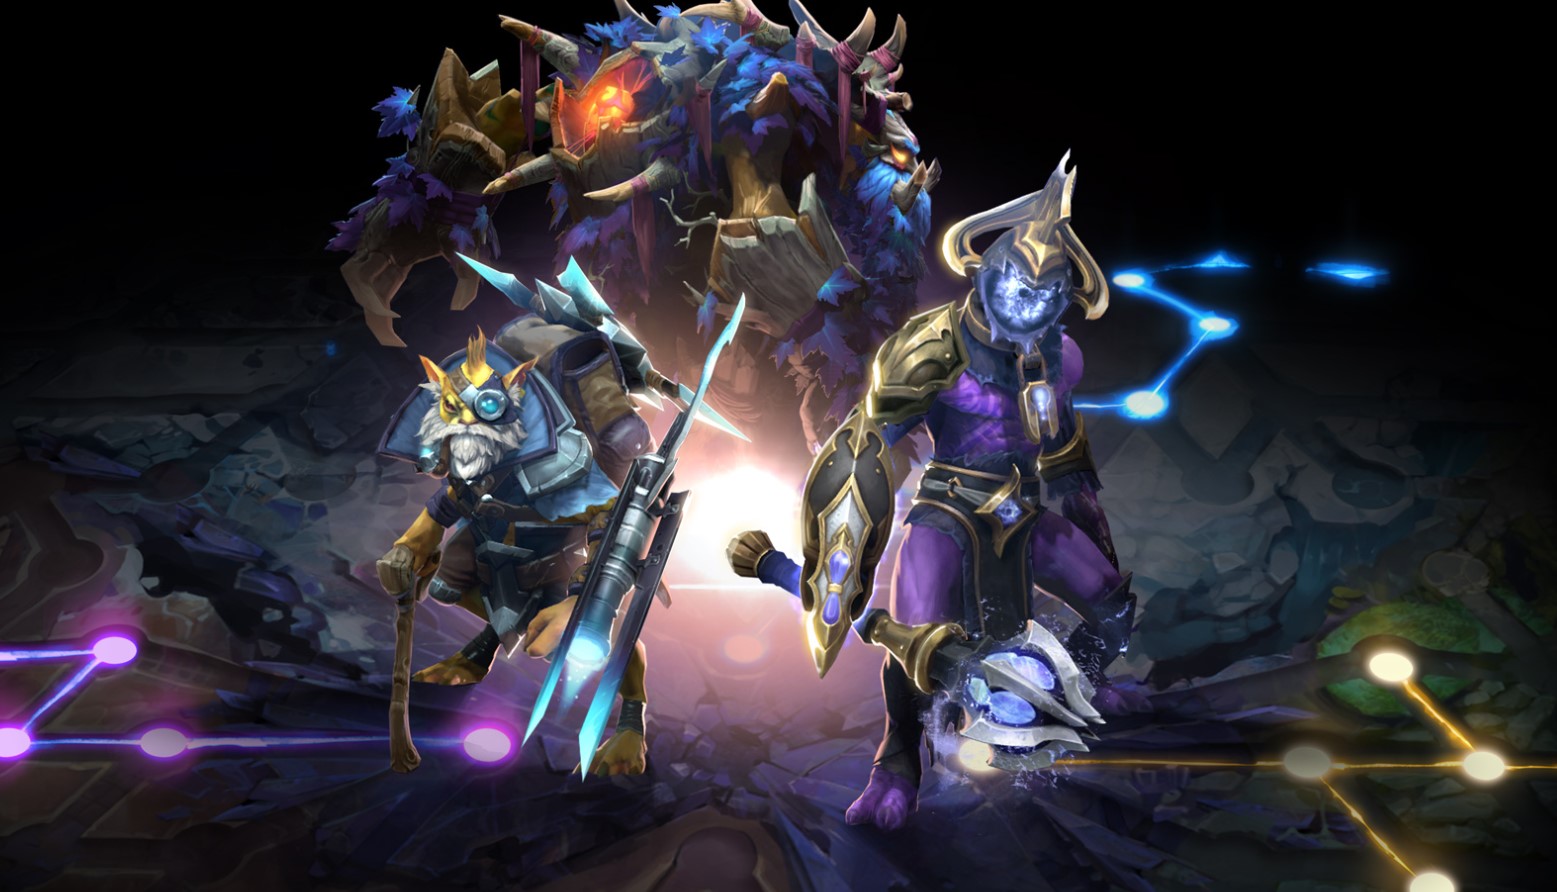 Aghanim's Labyrinth Battle pass released with Drow Arcana, new event game and more